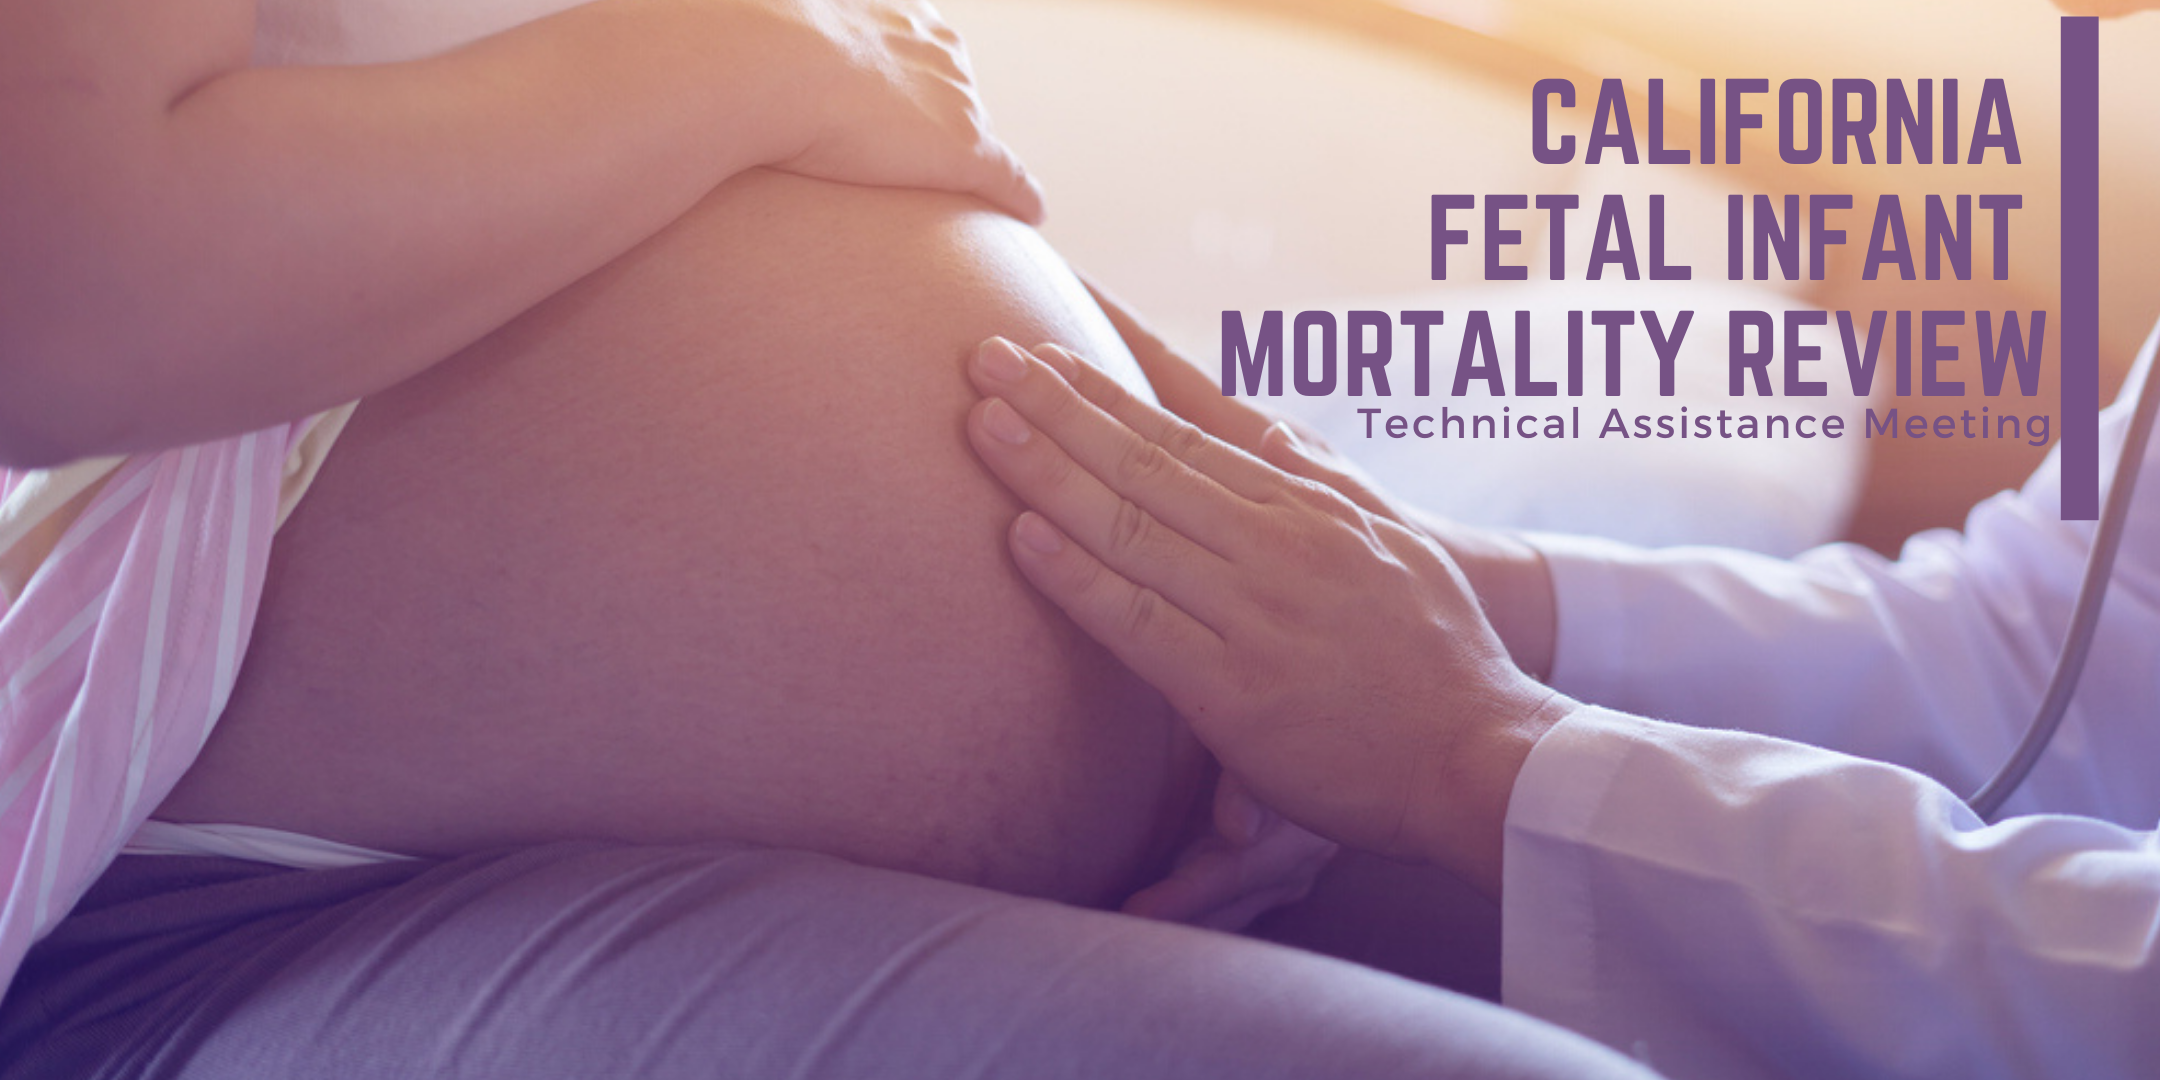 Fetal and Infant Mortality Review (FIMR) Technical Assistance Meeting